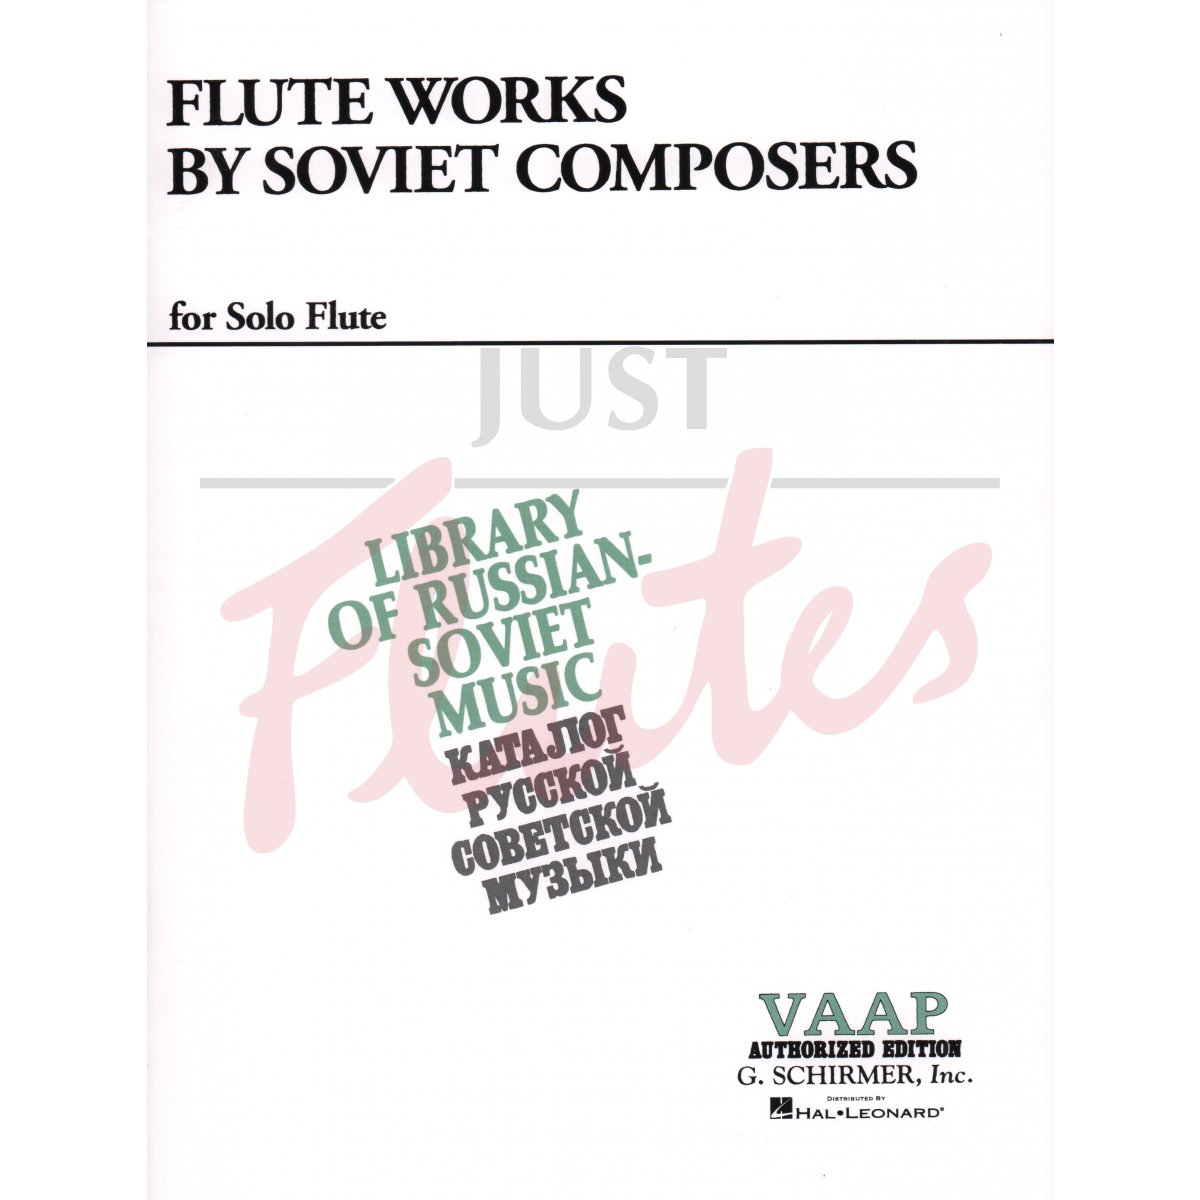 Flute Works by Soviet Composers for Solo Flute